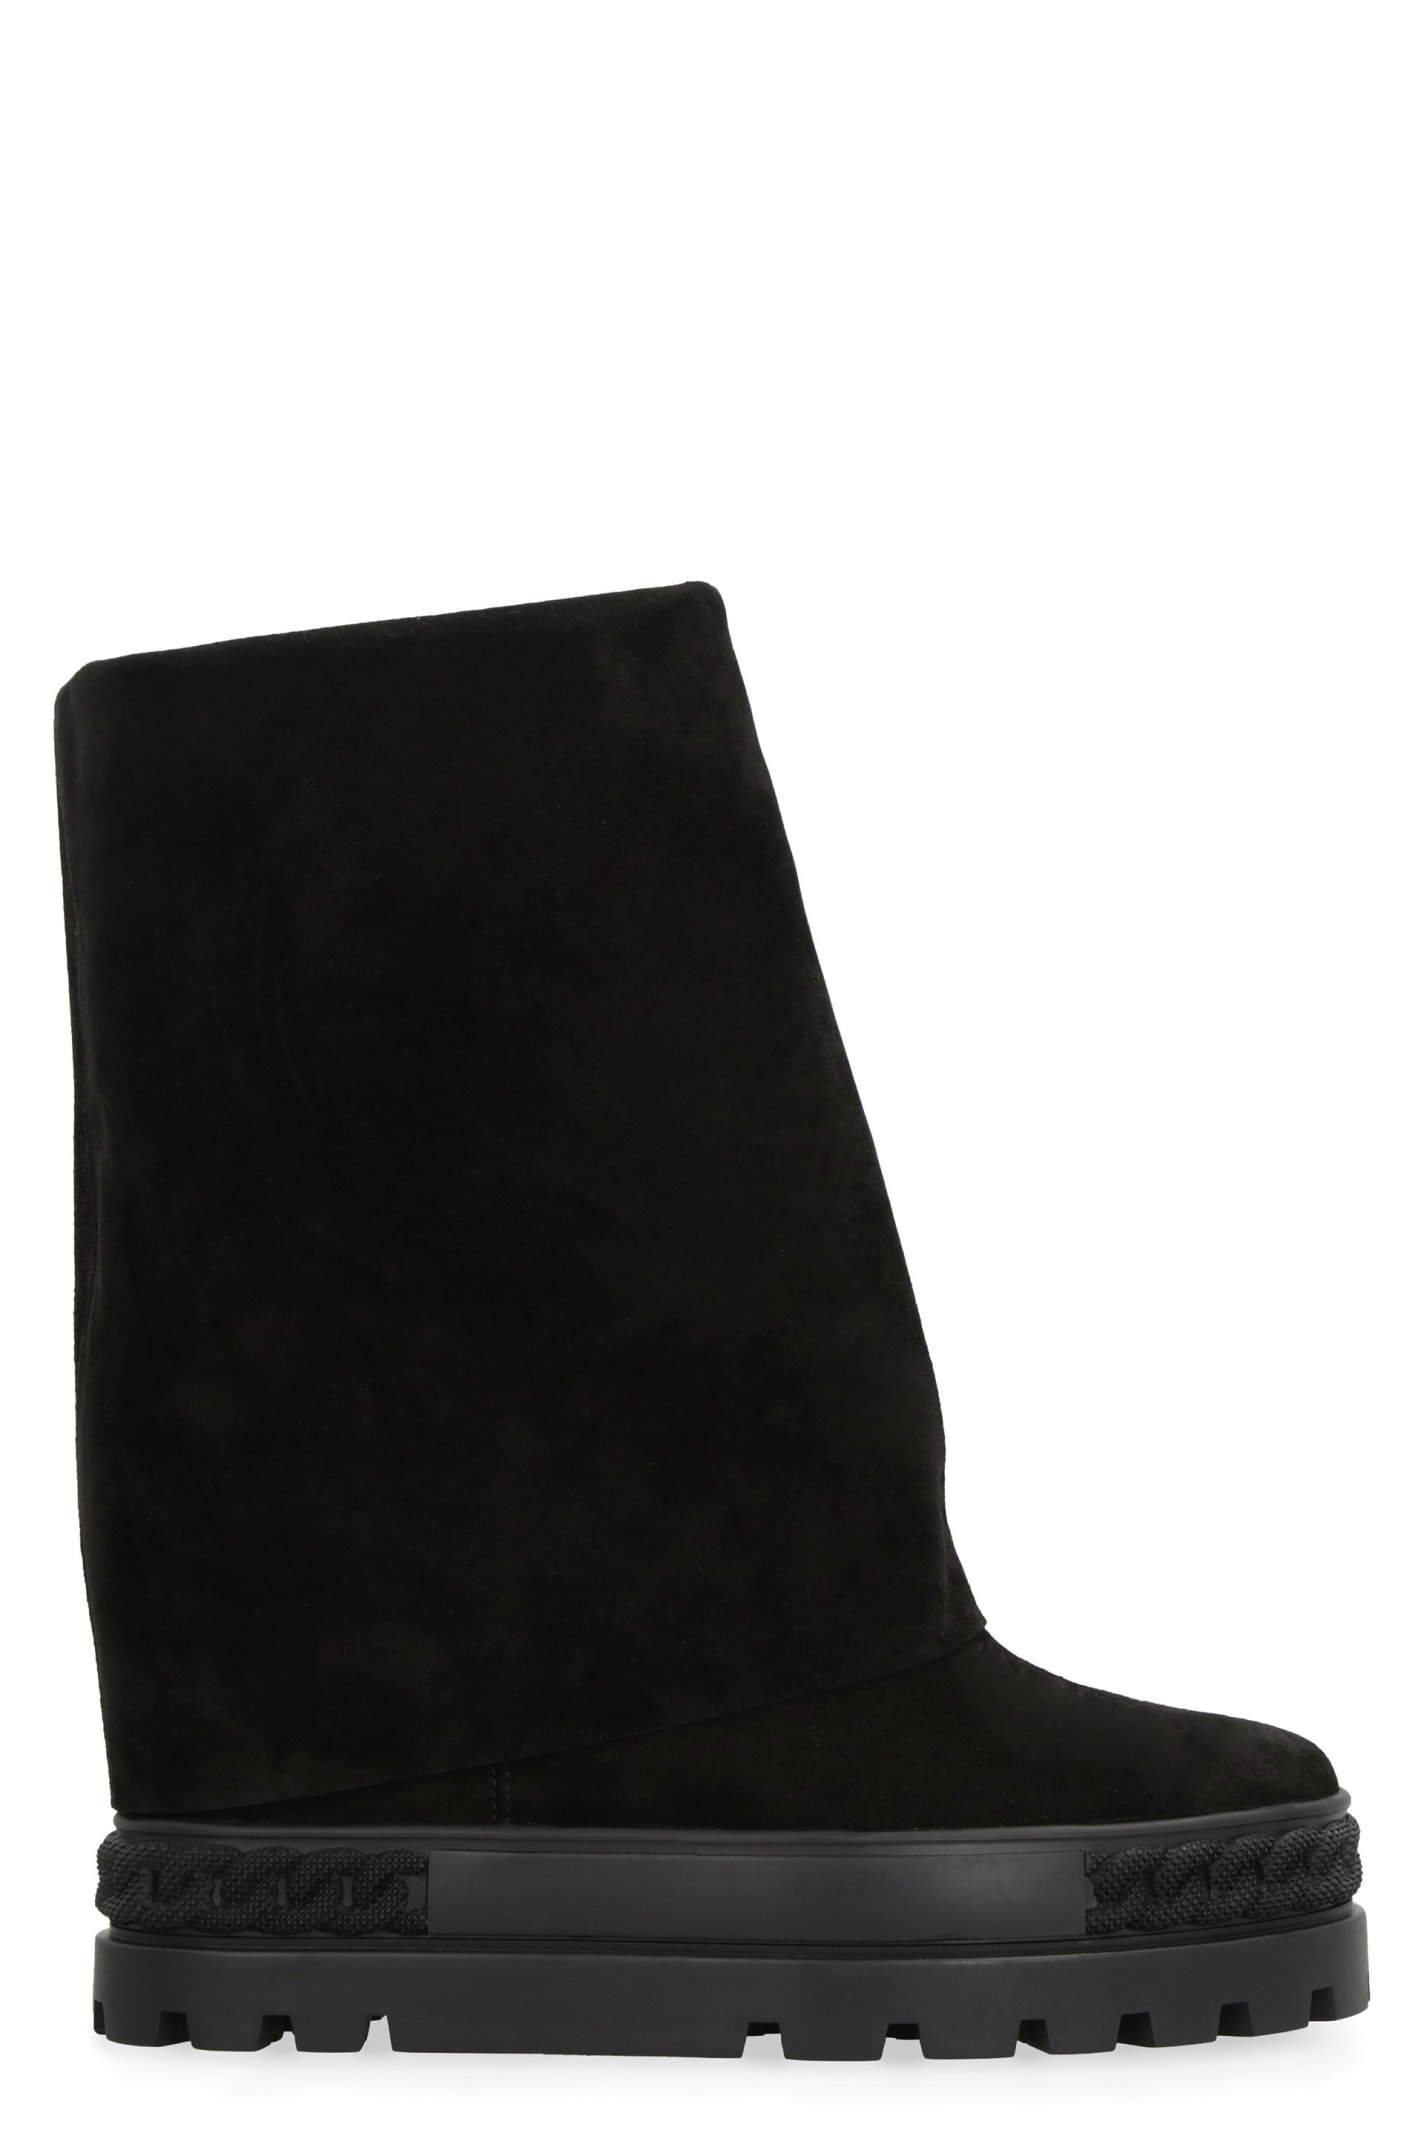 CASADEI SUEDE ANKLE BOOTS